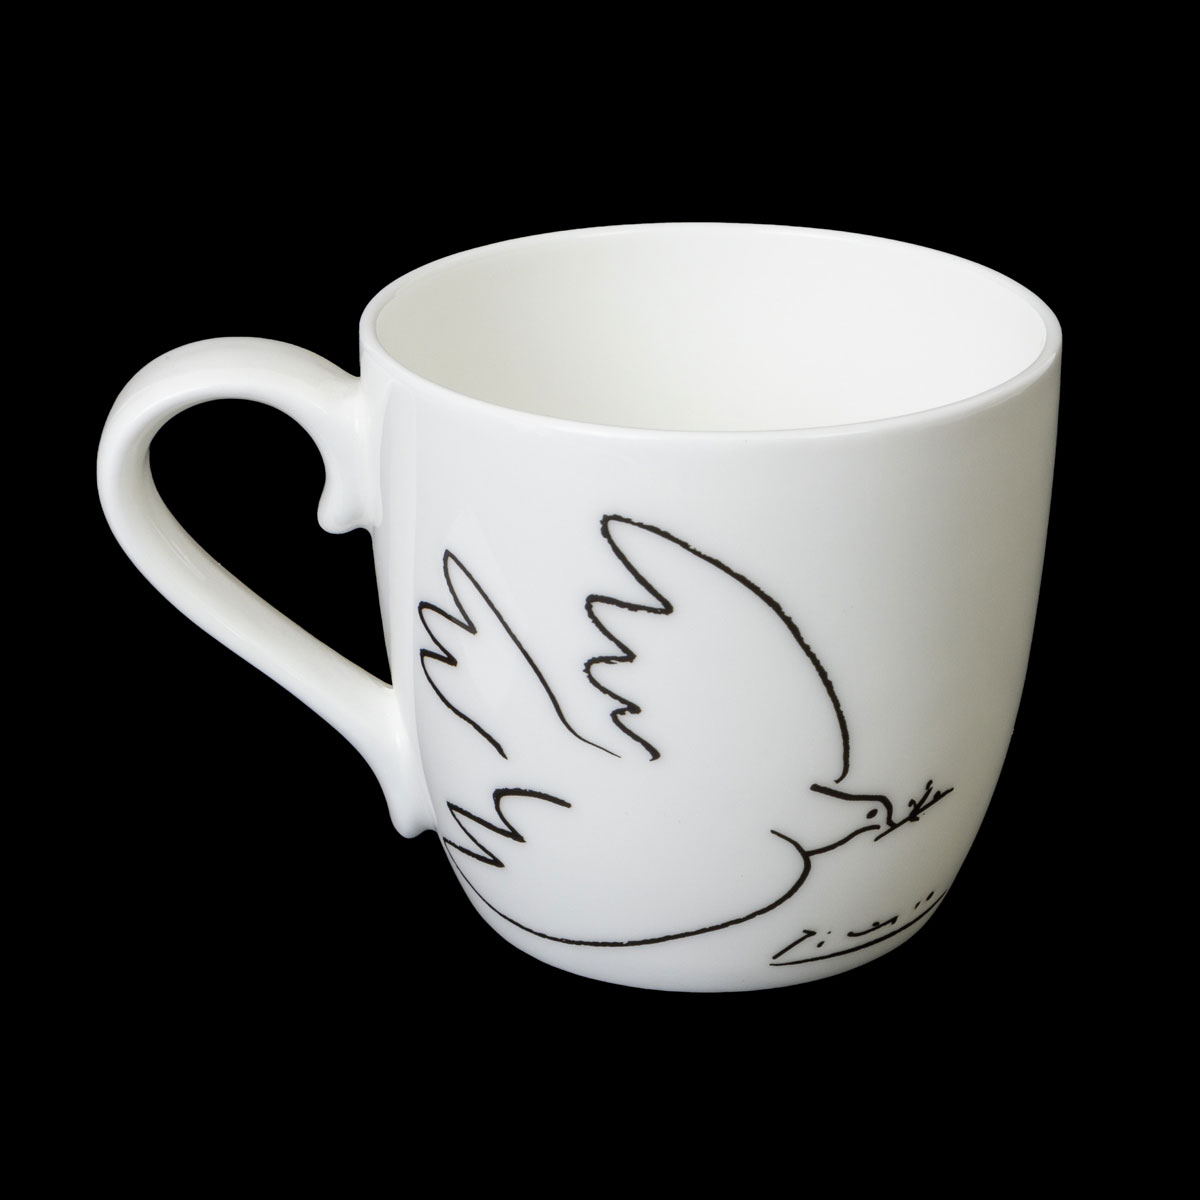 Pablo Picasso cup - The Dove of Peace (black and white) (detail n°1)